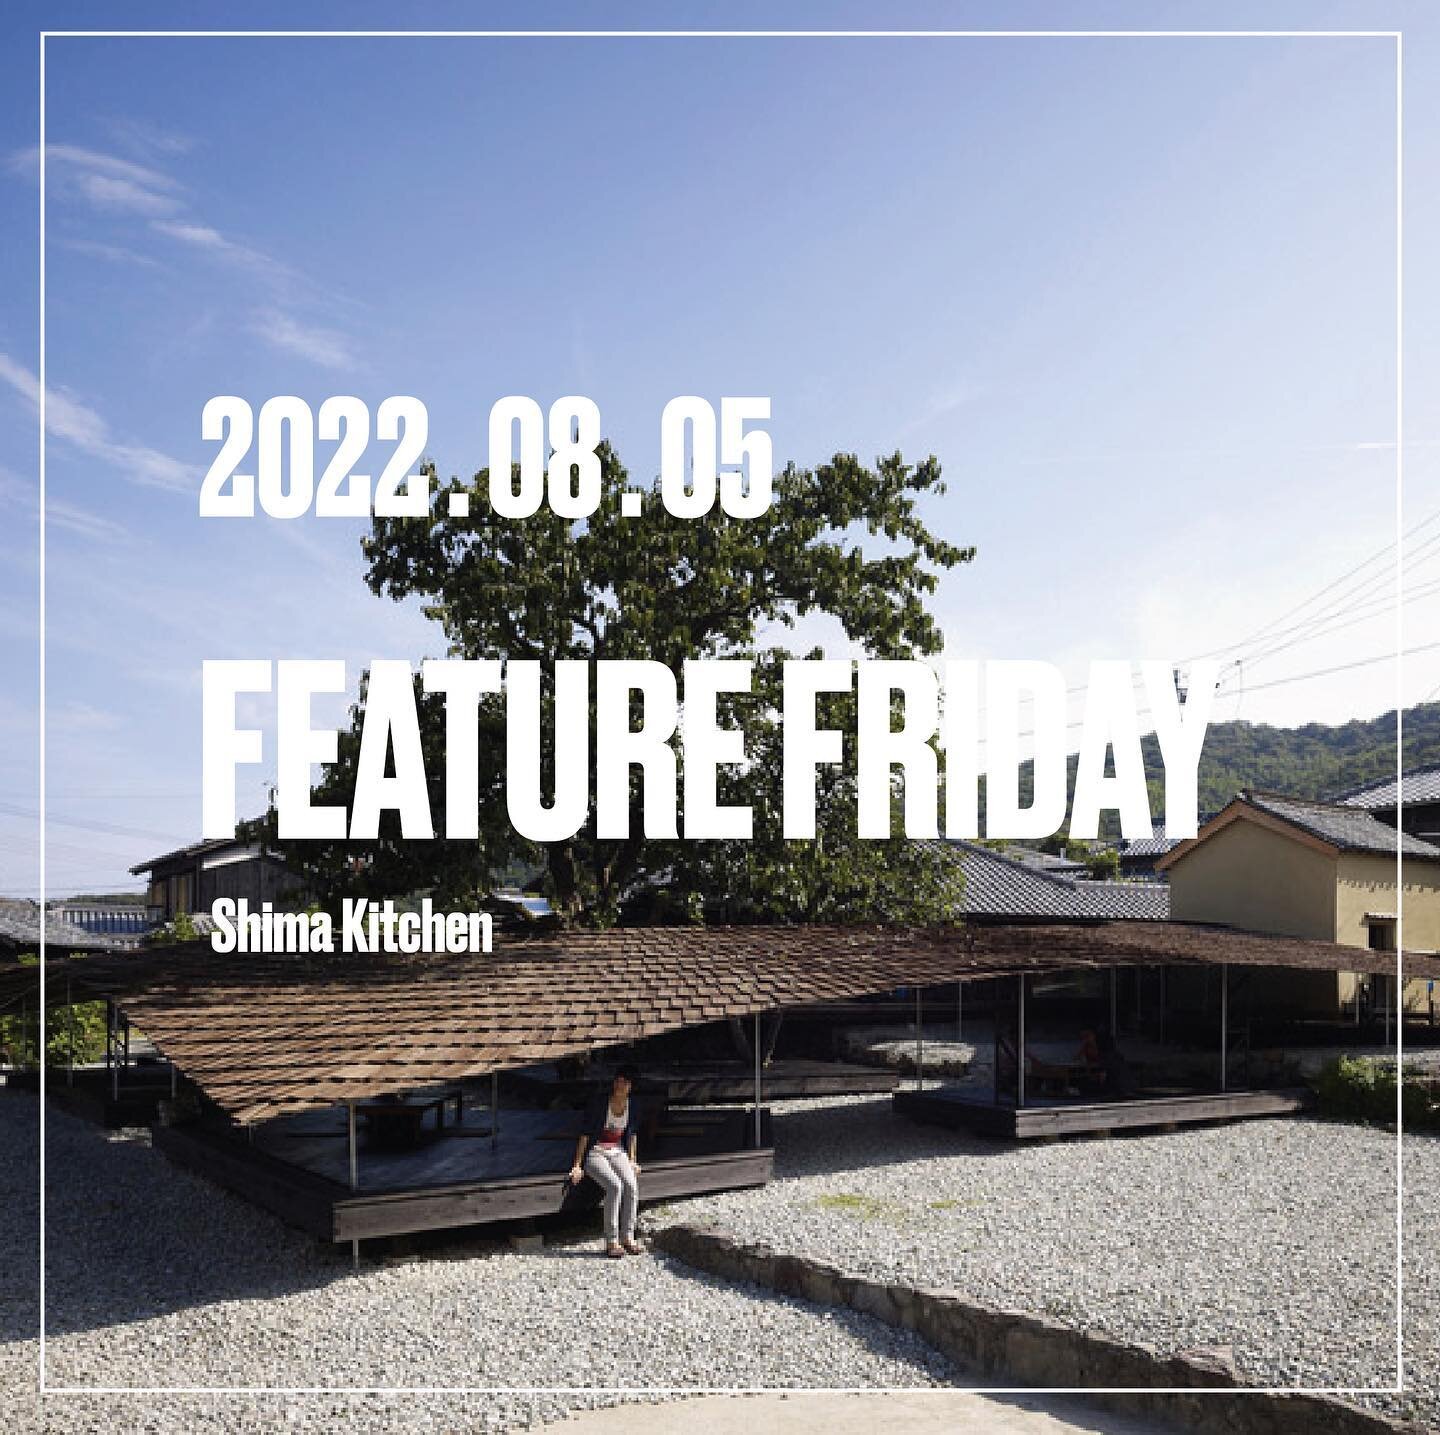 Feature Friday
.
Project: Shima Kitchen

Architects: Architects Atelier Ryo Abe

Location: Teshima, Japan
.
We like to end the week by featuring interesting projects with similar missions around the world.

&lsquo;Shima Kitchen was a renovation proje